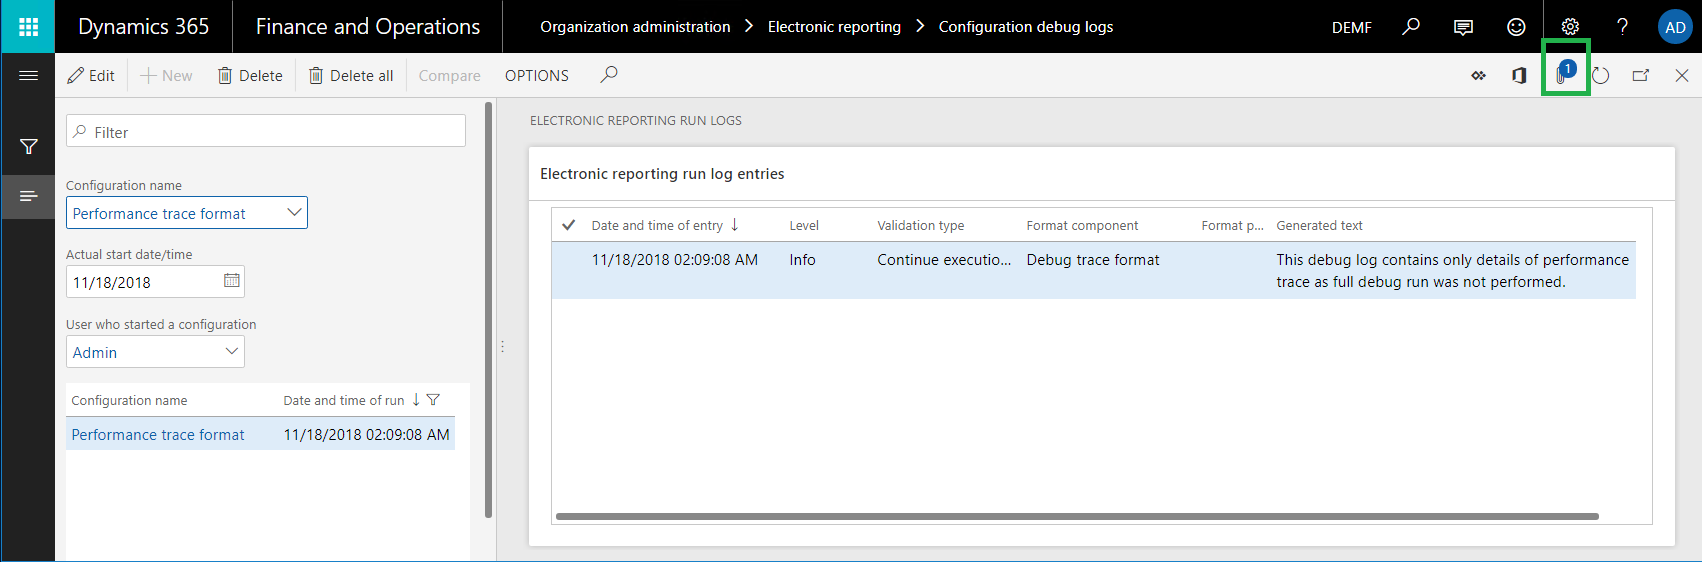 Attachments button on the Electronic reporting run logs page.